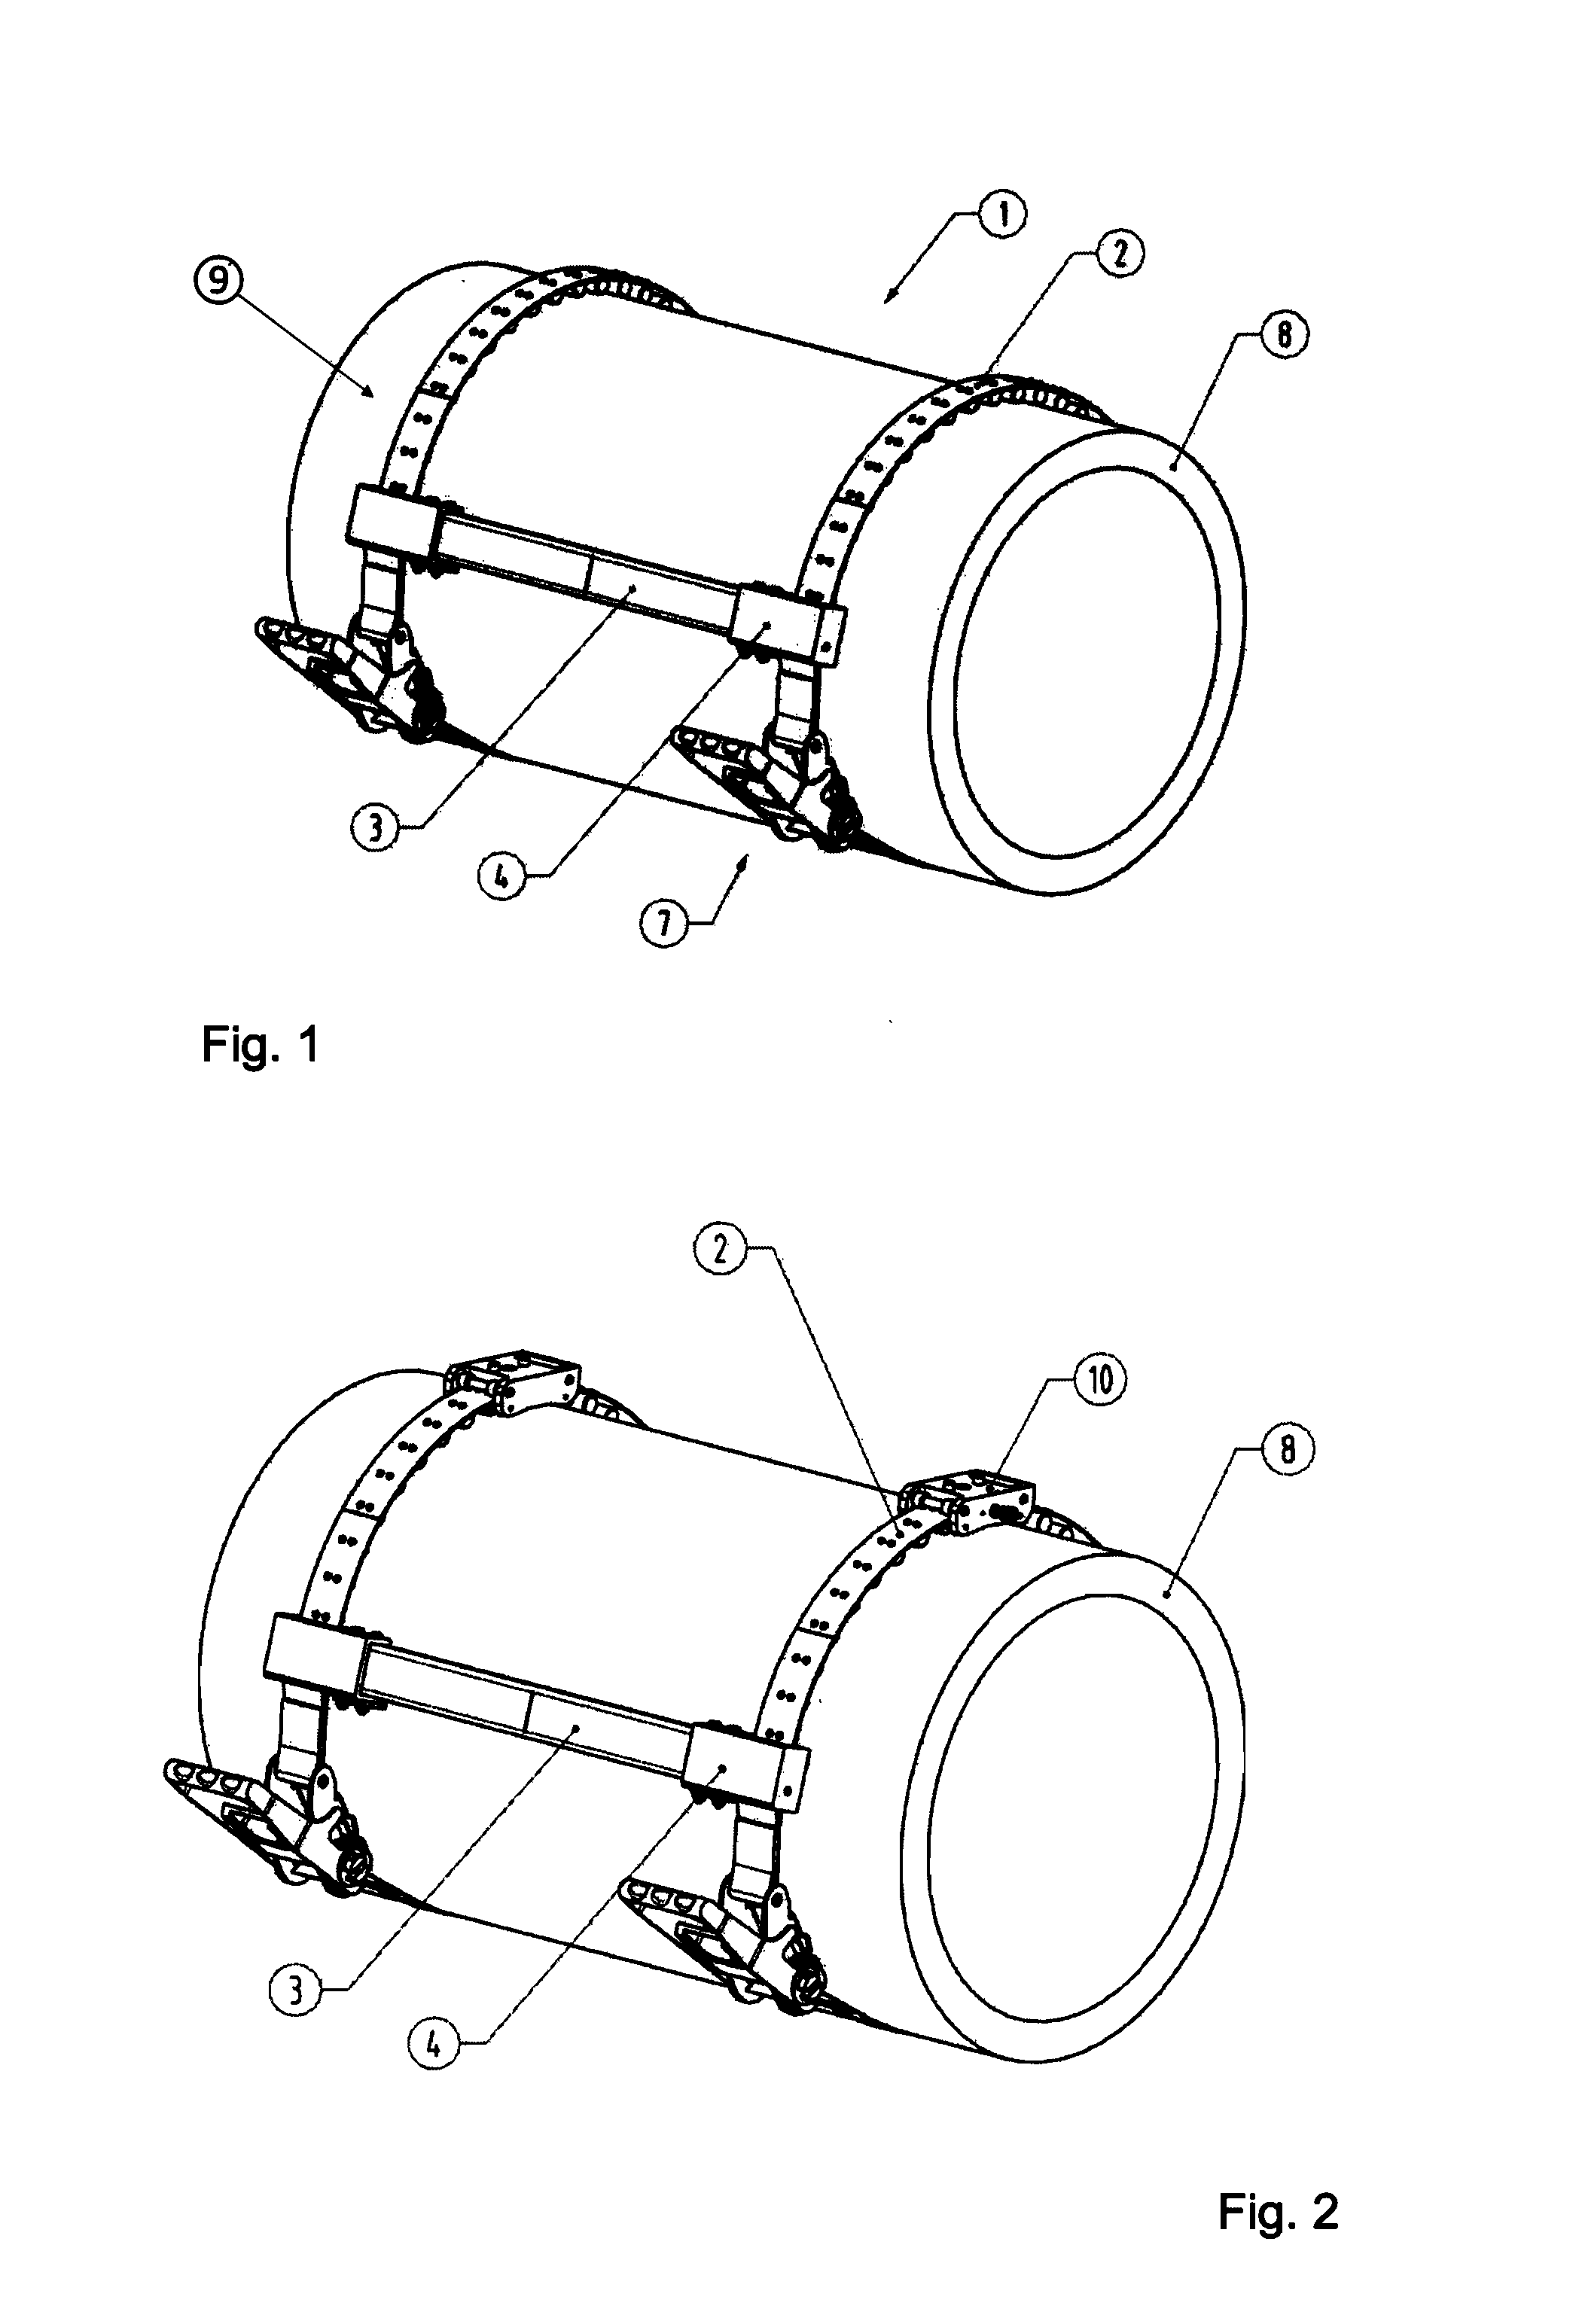 Apparatus for guiding tube processing devices